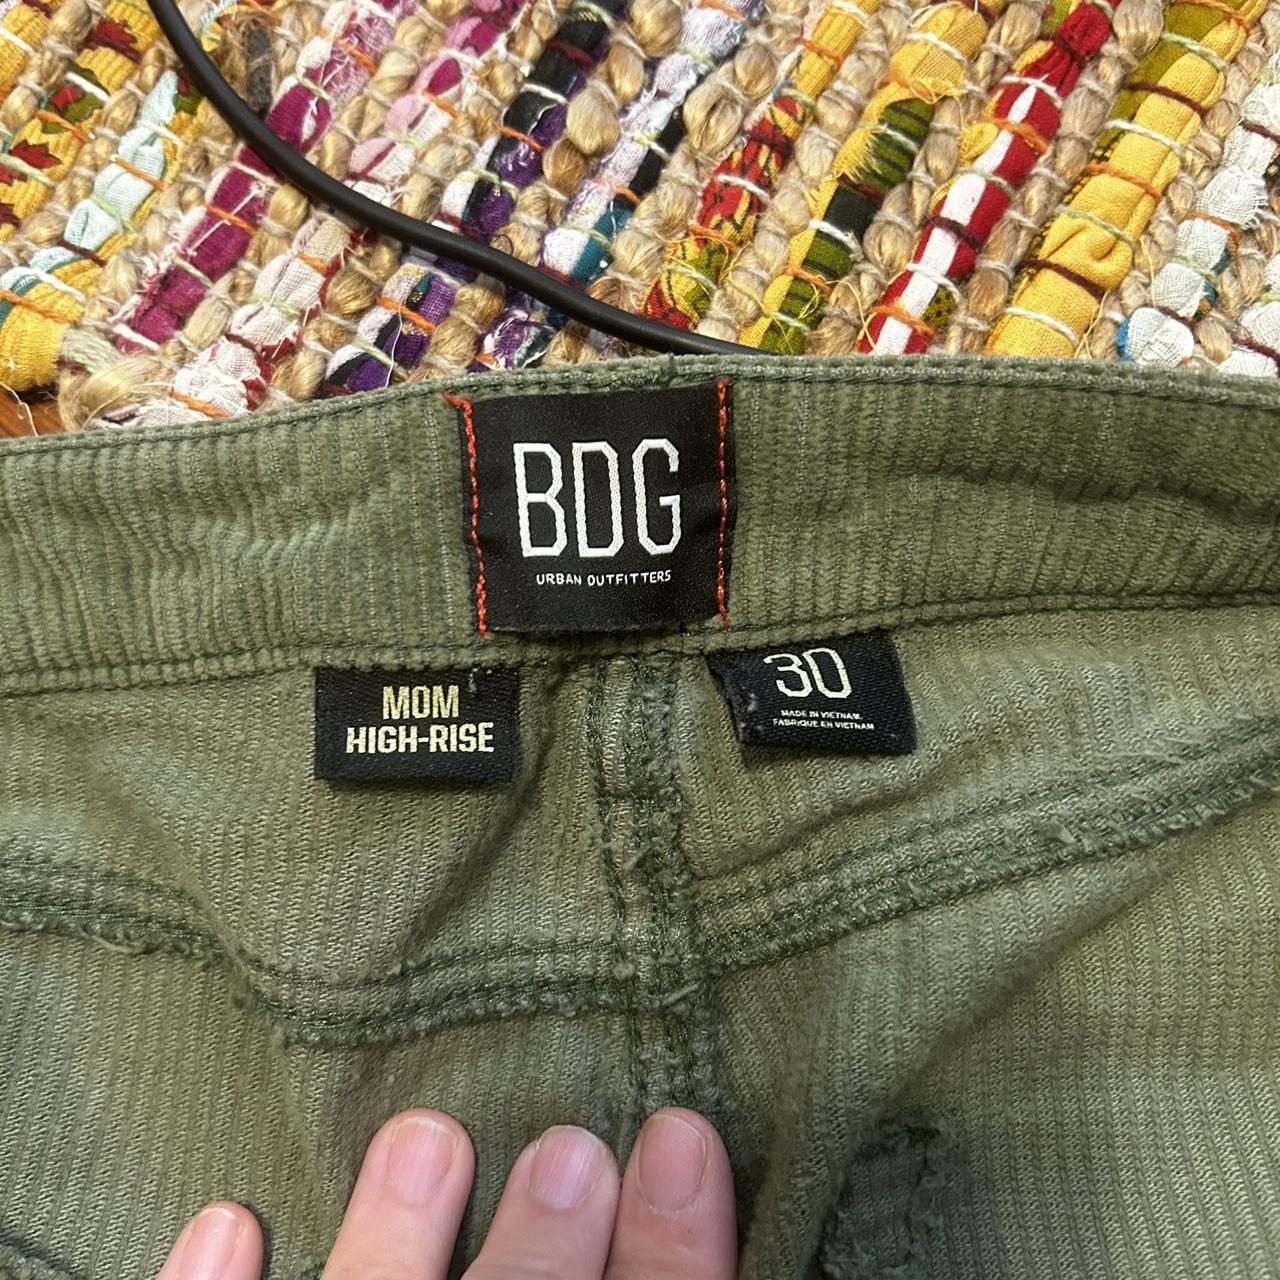 BDG mom high-rise corduroy pants in forest green. - Depop